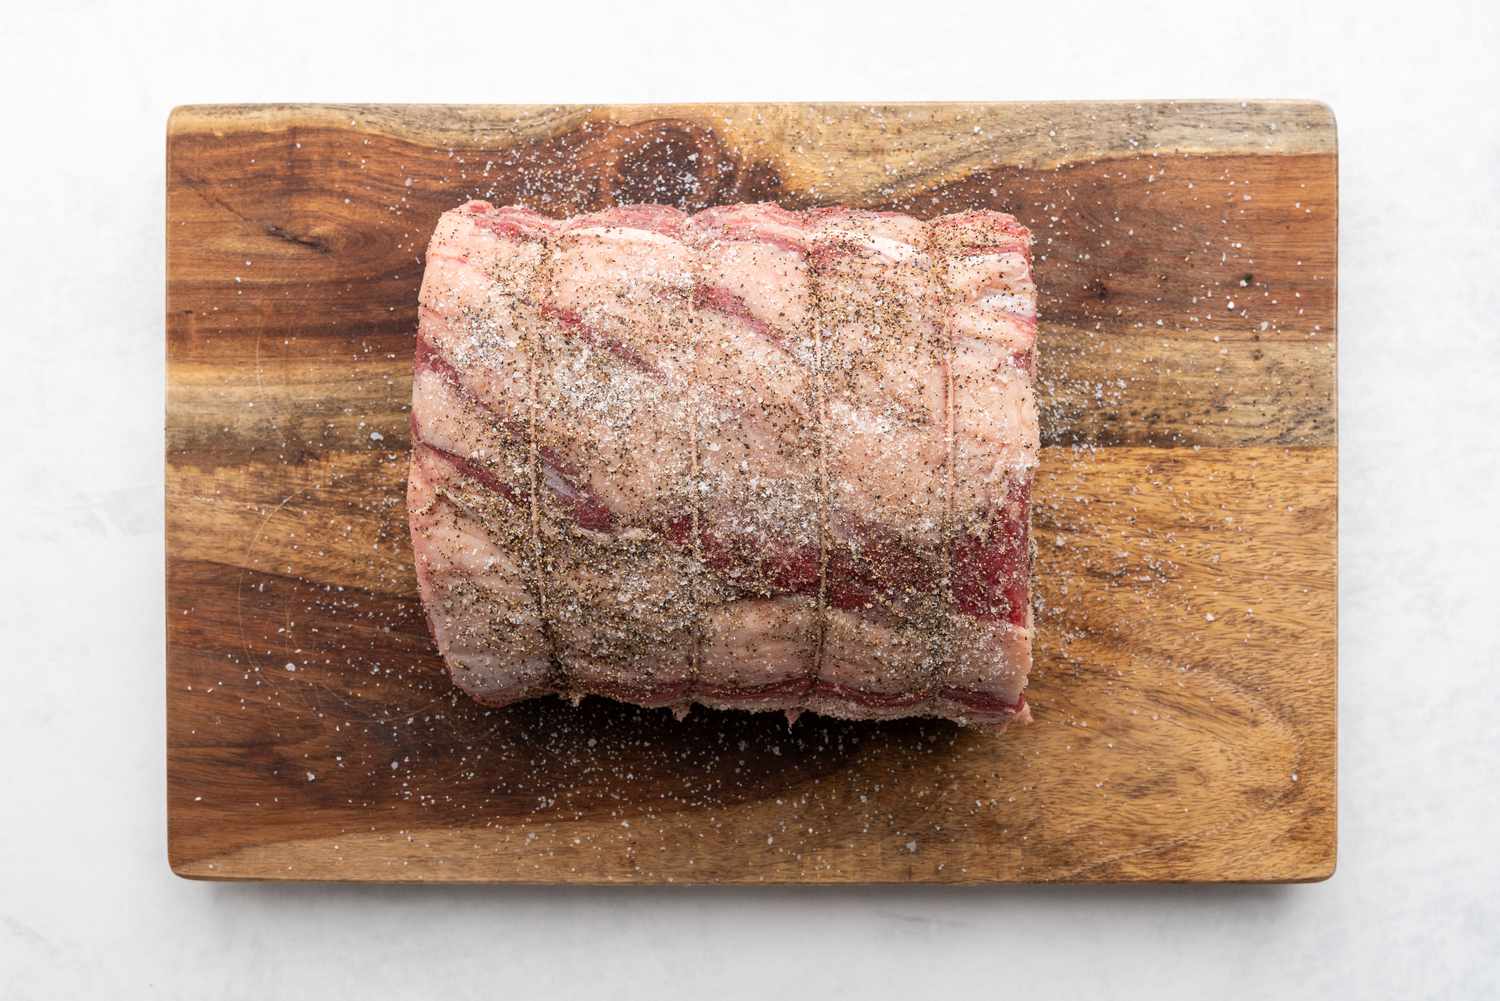 Season the roast with salt and pepper on a cutting board 